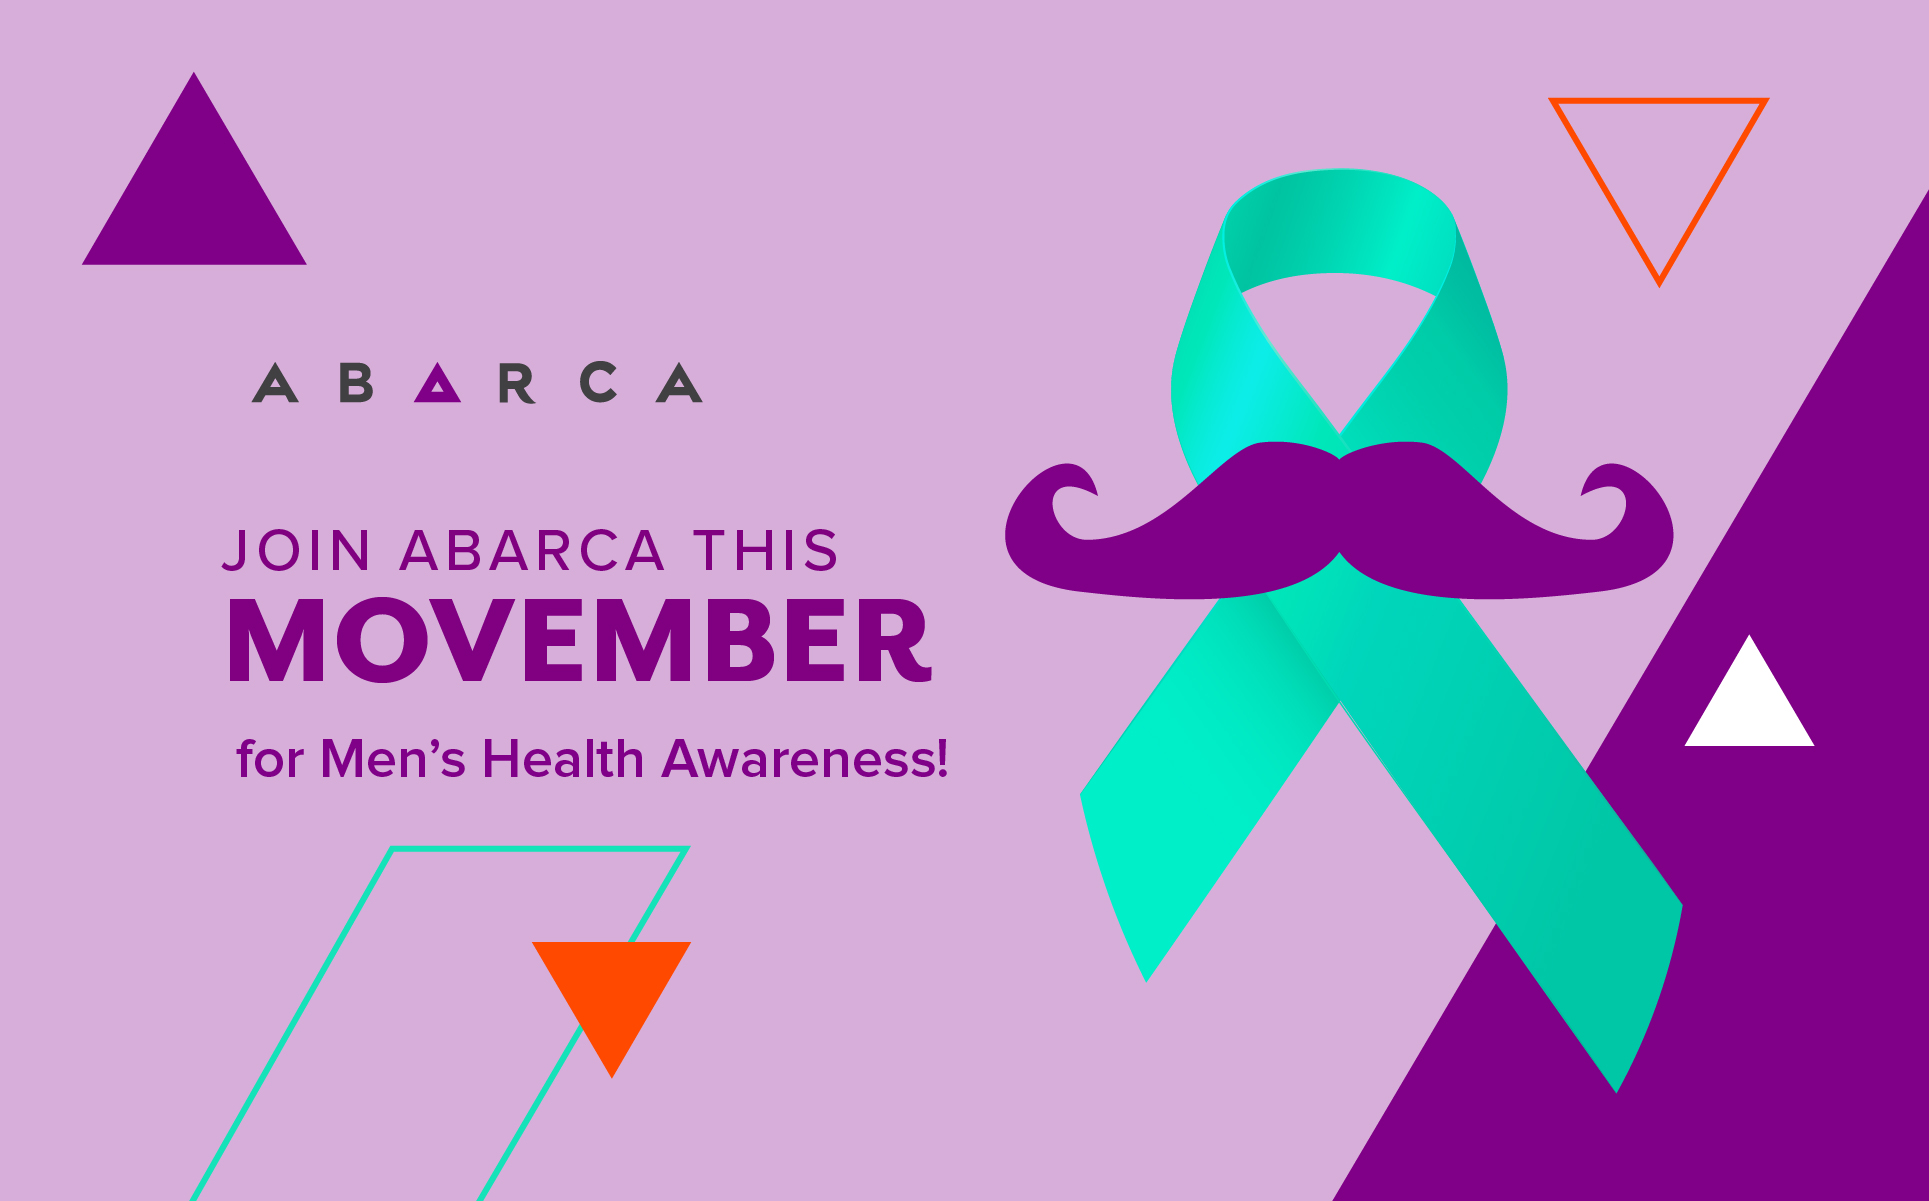 Join Abarca this Movember to bring awareness to Men’s Health!